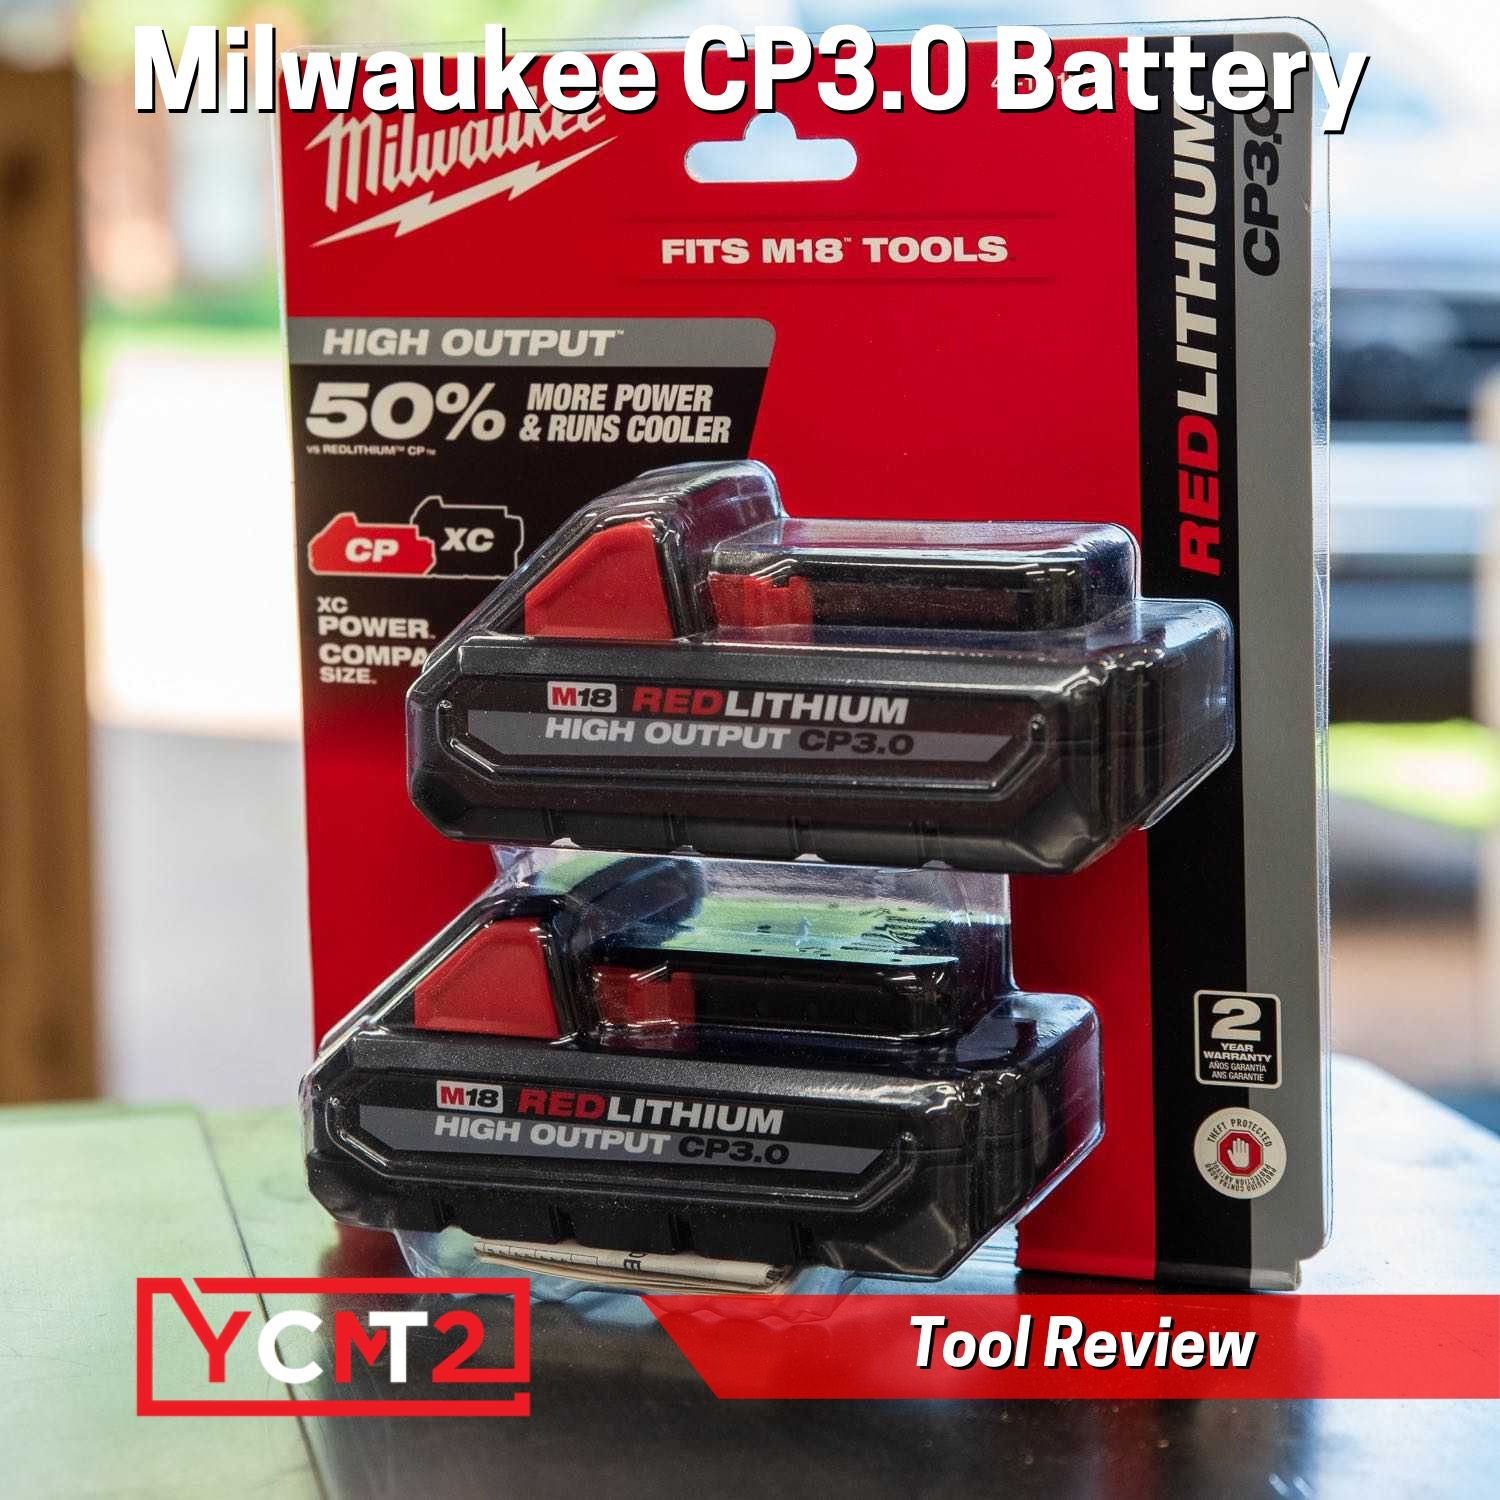 milwaukee-m18-high-output-xc8-0ah-battery-review-youcanmakethistoo